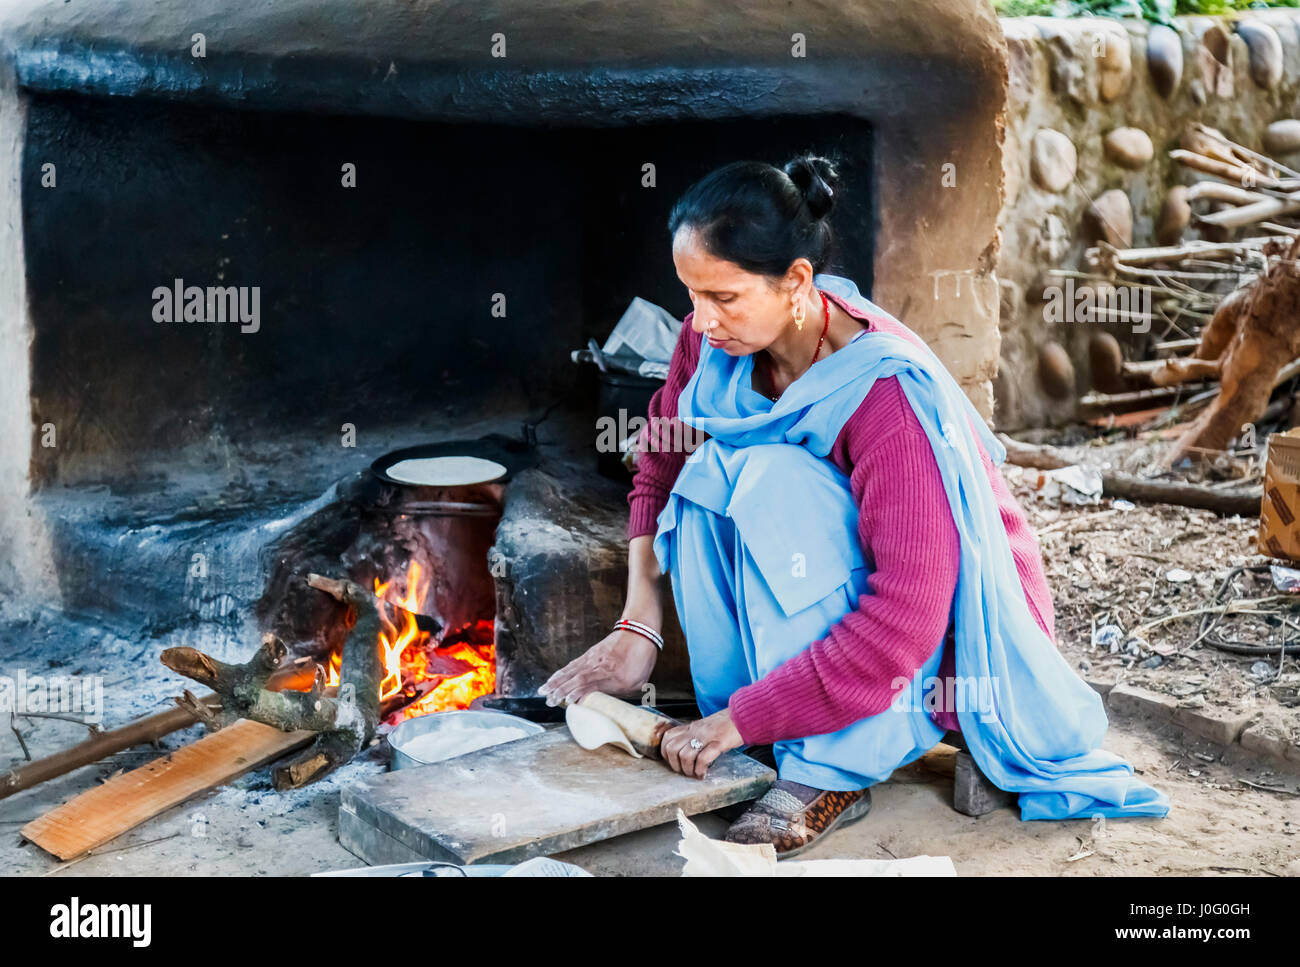 Local Indian woman wearing blue sari cooking chapatis in an oven with open fire, Judge's Court Hotel, Pragpur, Kagra district, Himachal Pradesh, India Stock Photo